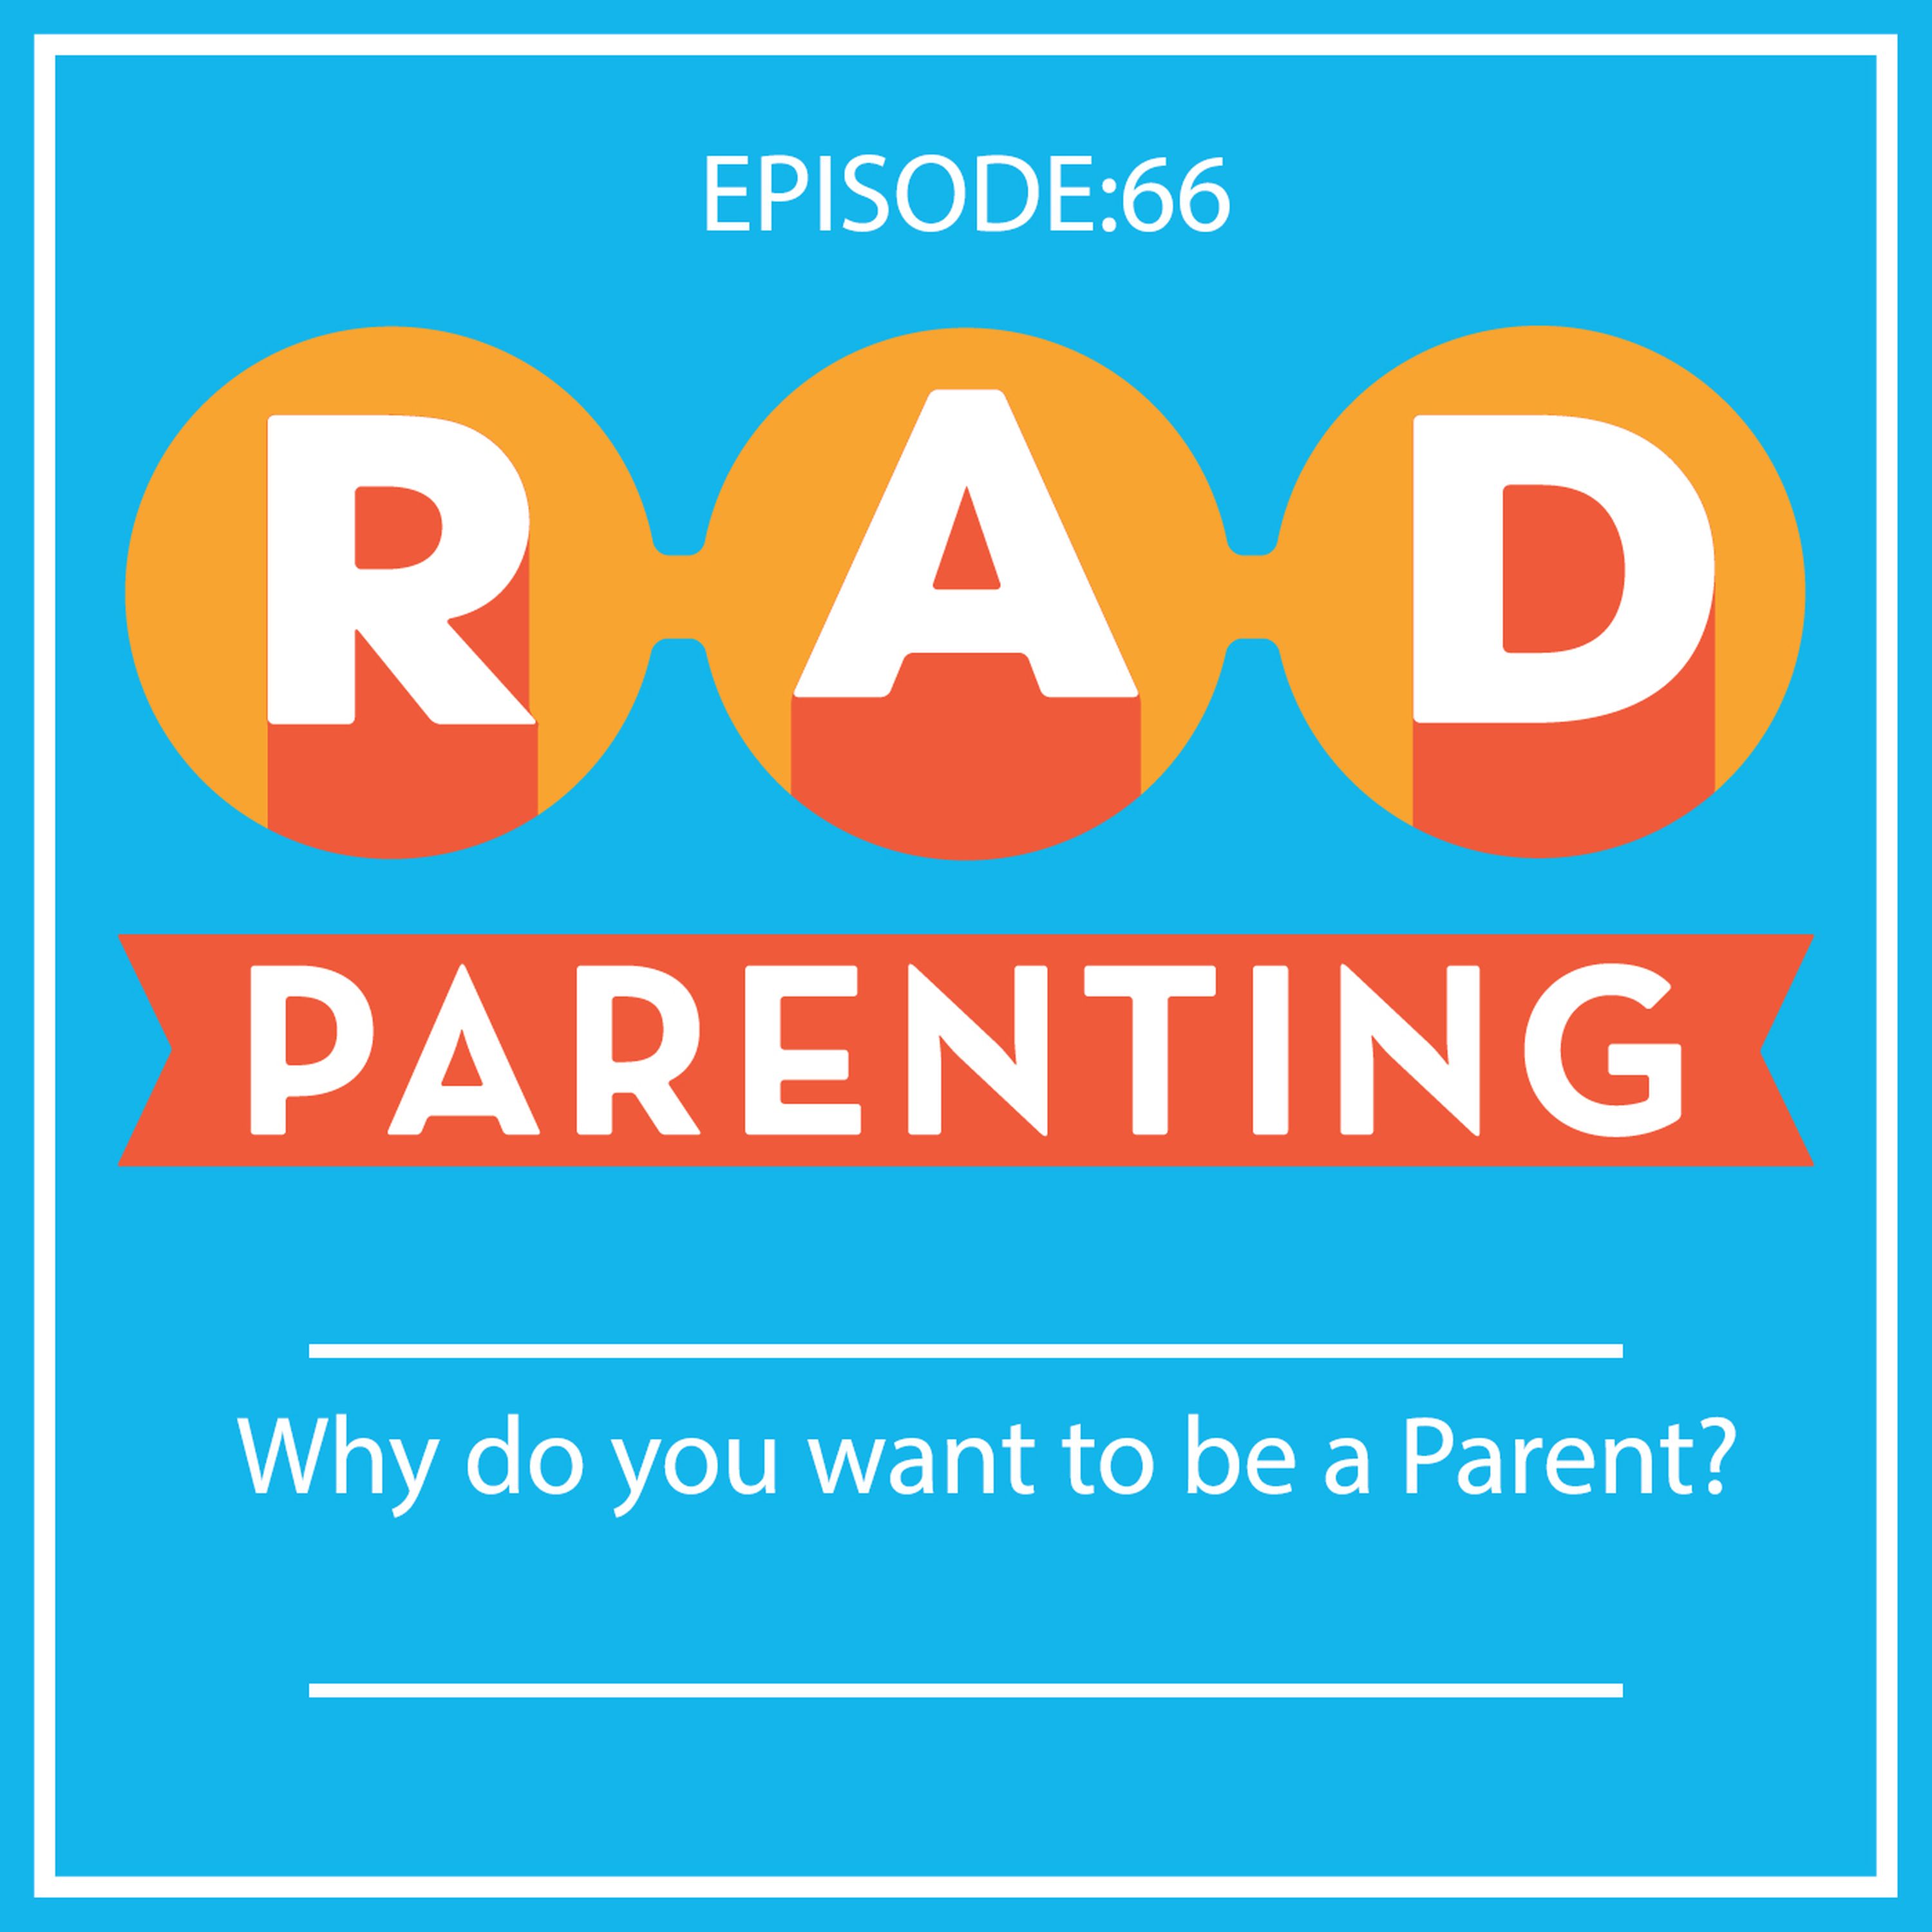 Why do you want to be a Parent?